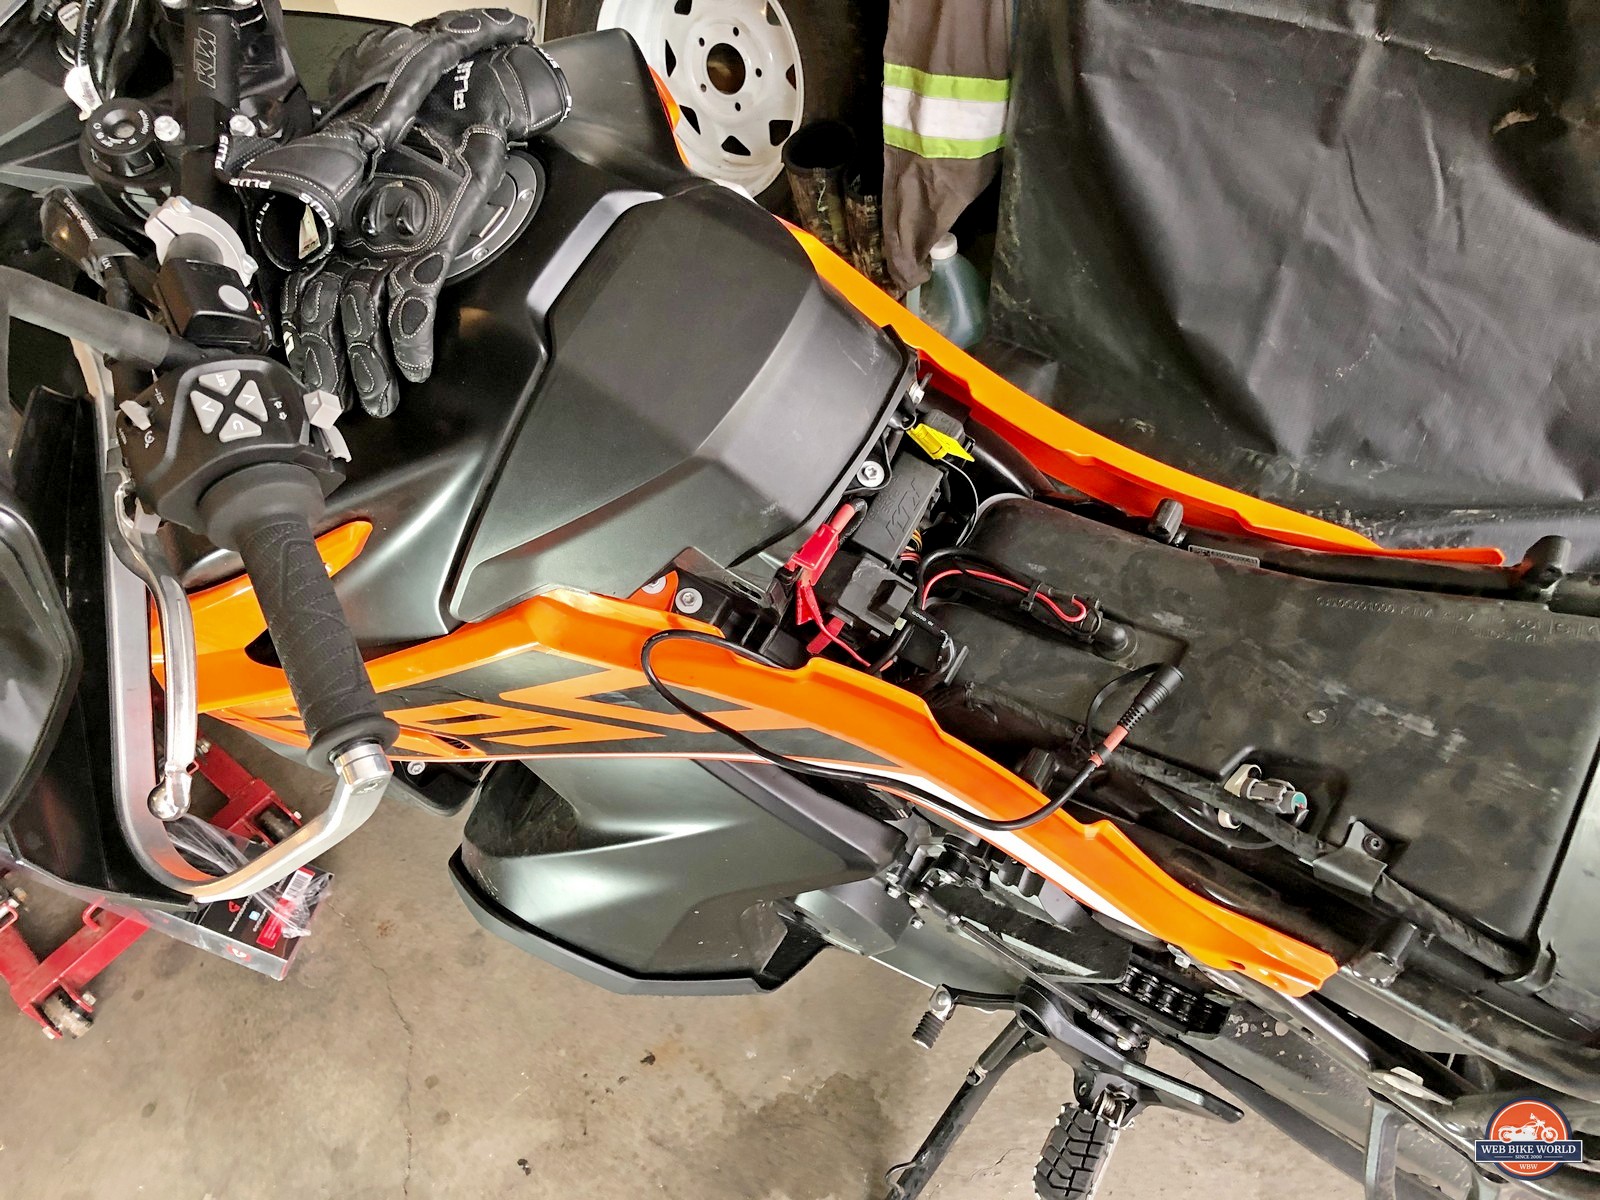 Power harness for the Gerbing heated vest installed in a 2019 KTM 790 Adventure.